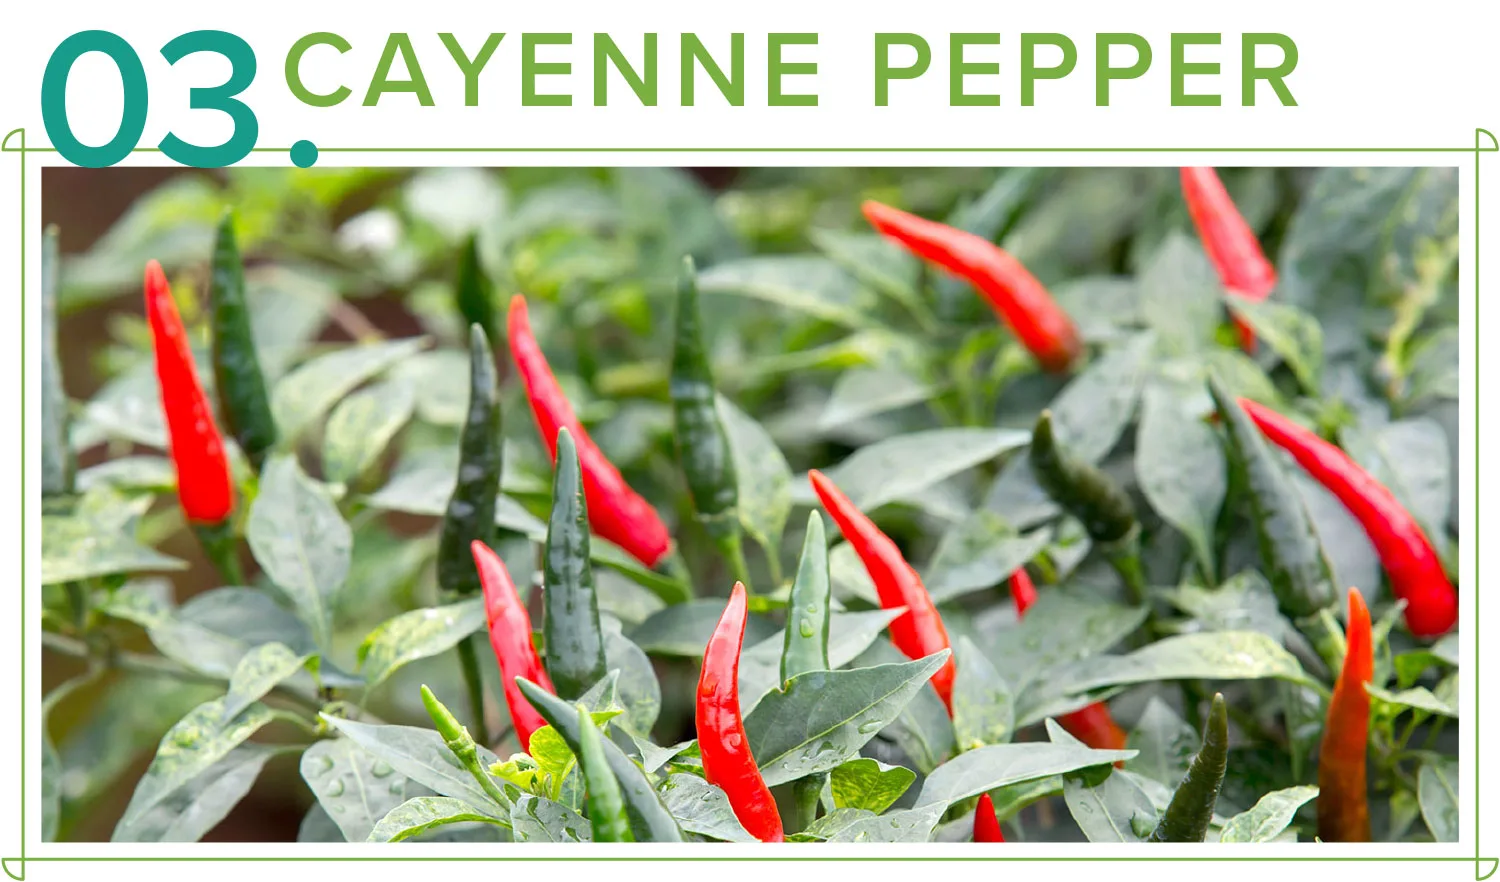 medicinal-plants-03-cayannepepper